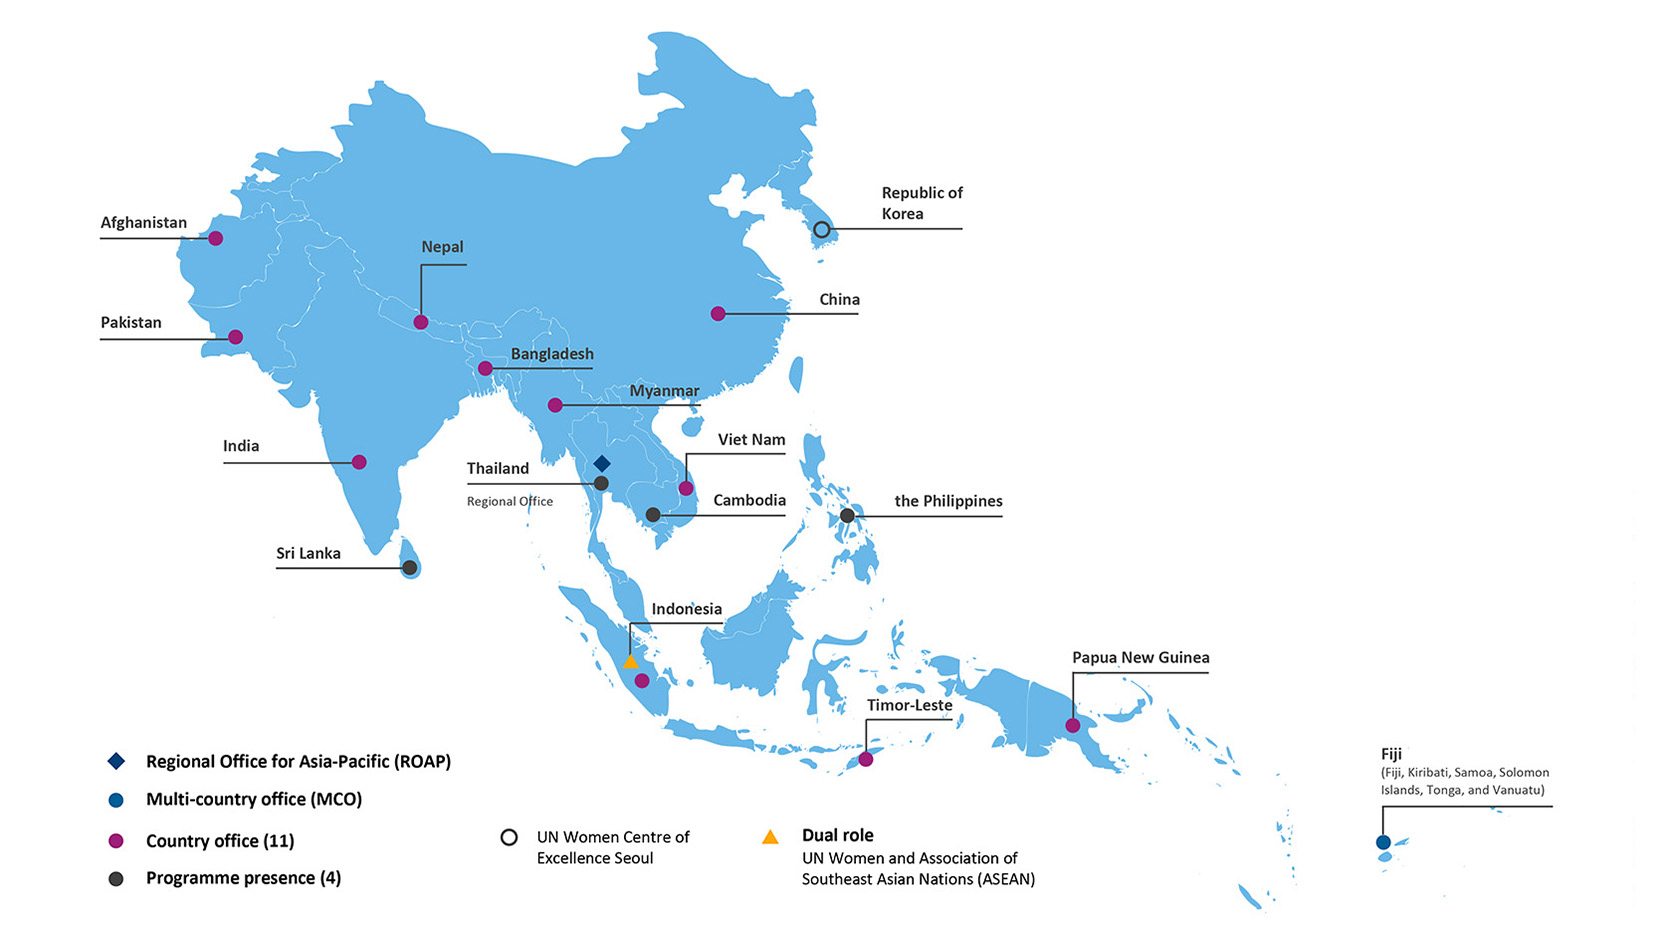 UN Women offices in Asia-Pacific